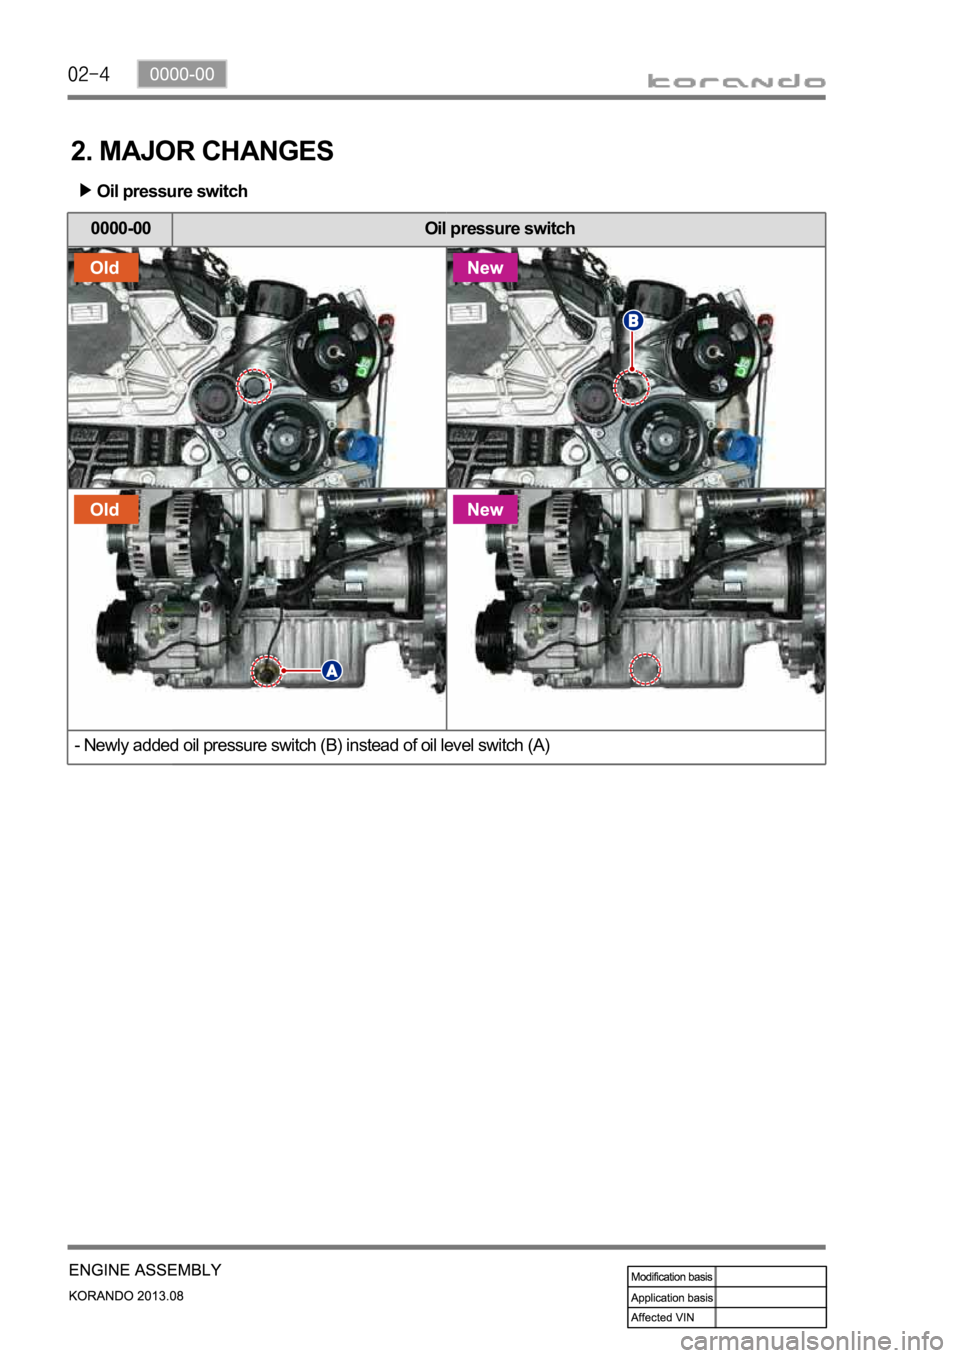 SSANGYONG KORANDO 2013  Service Manual 0000-00 Oil pressure switch
- Newly added oil pressure switch (B) instead of oil level switch (A)
2. MAJOR CHANGES
Oil pressure switch 